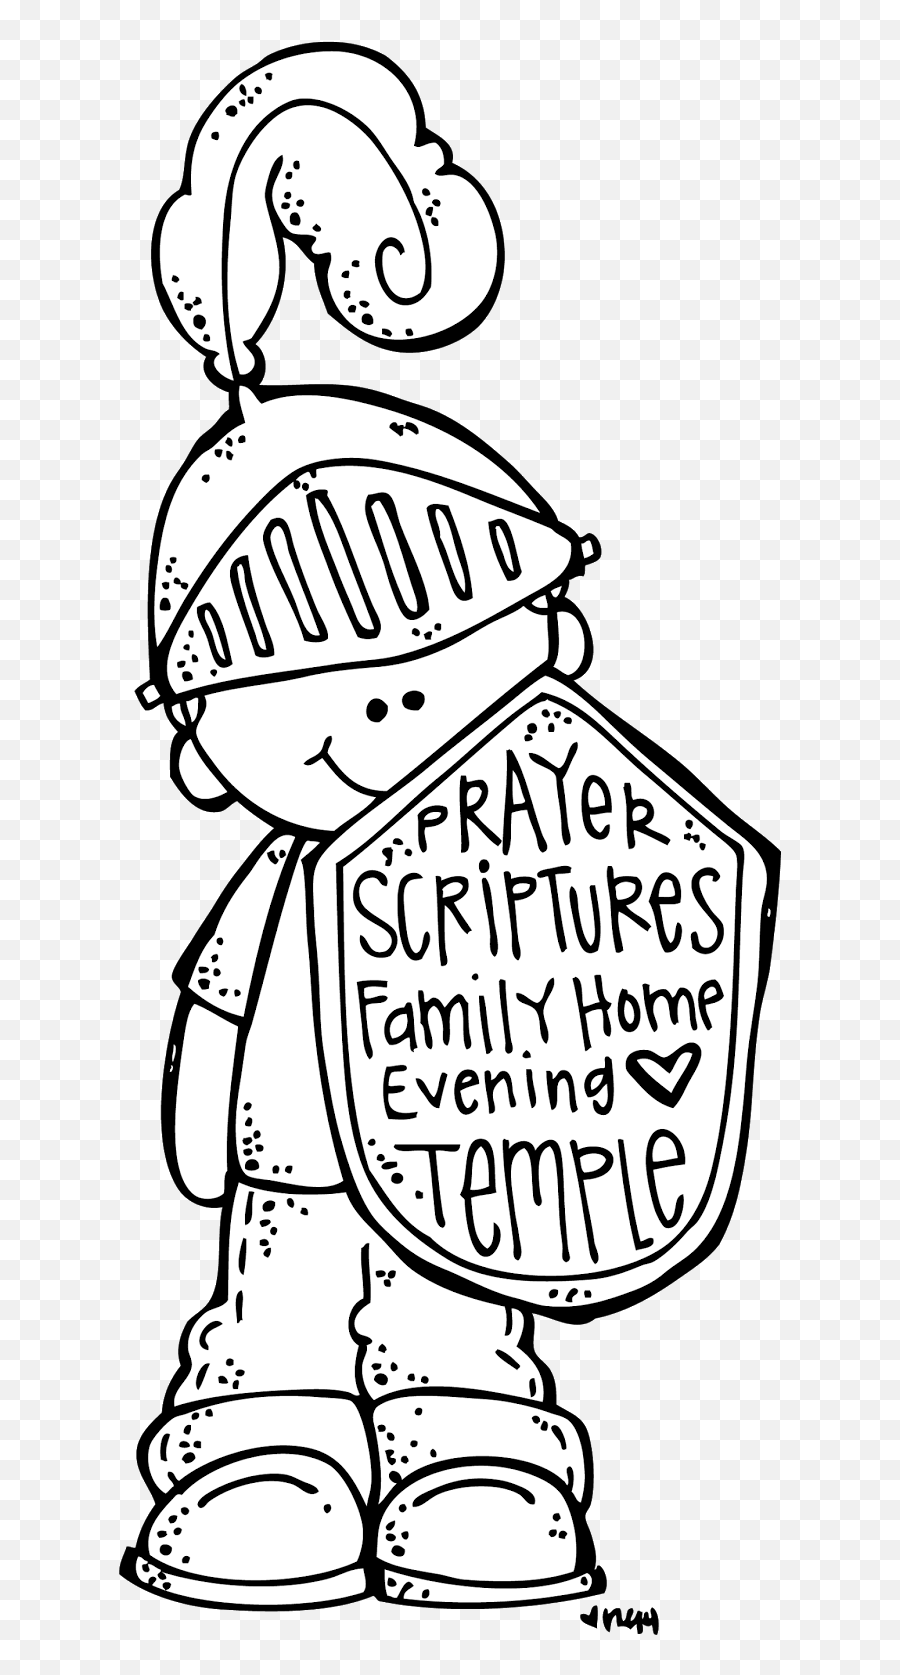 Saints Modern Joyful And Inspiring - Child In Armor Clipart Black And White Png,Printable Orthodox Icon Coloring Pages